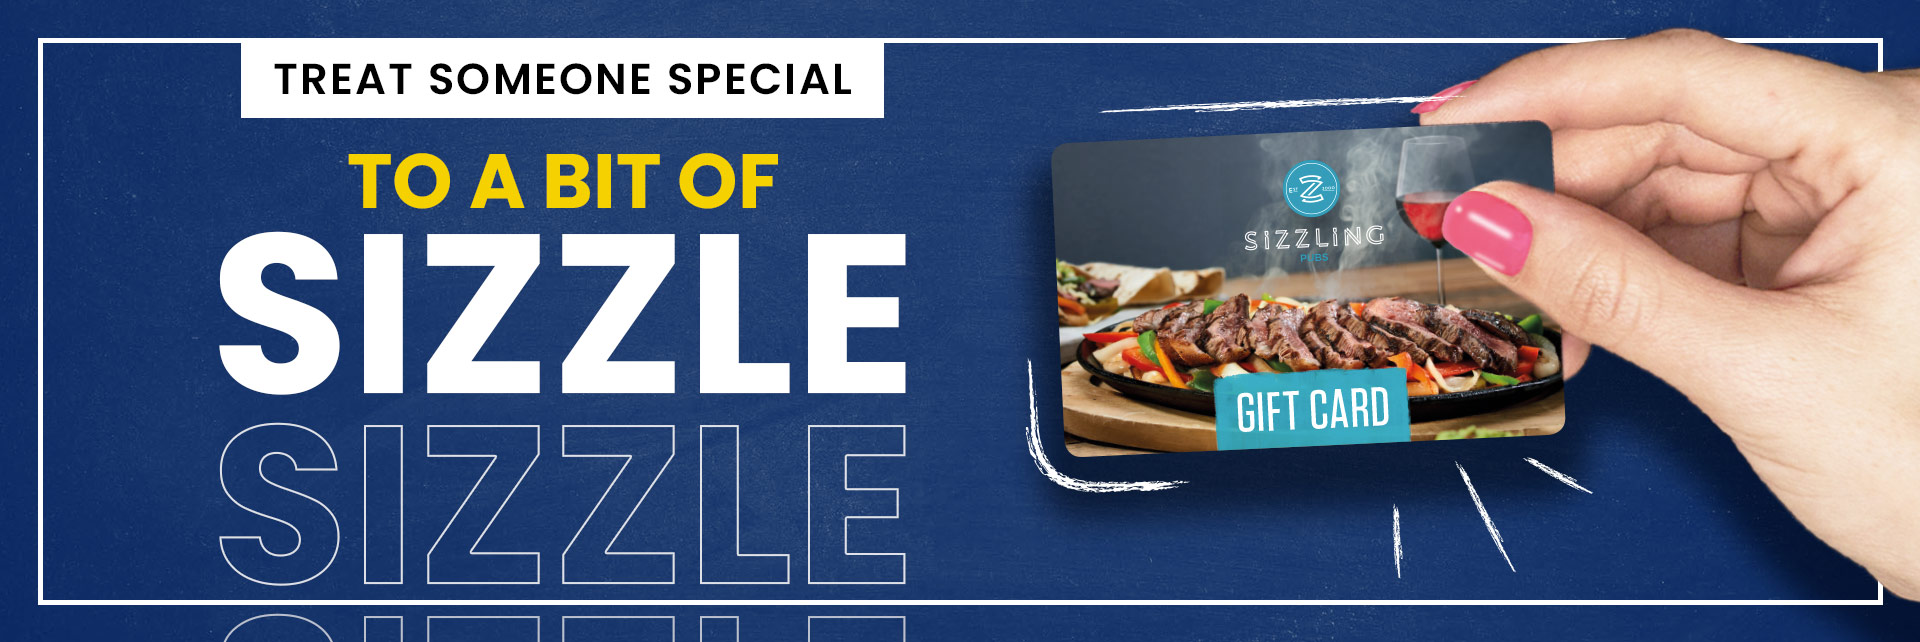 Sizzling Pubs Gift Card at The Maudslay in Coventry